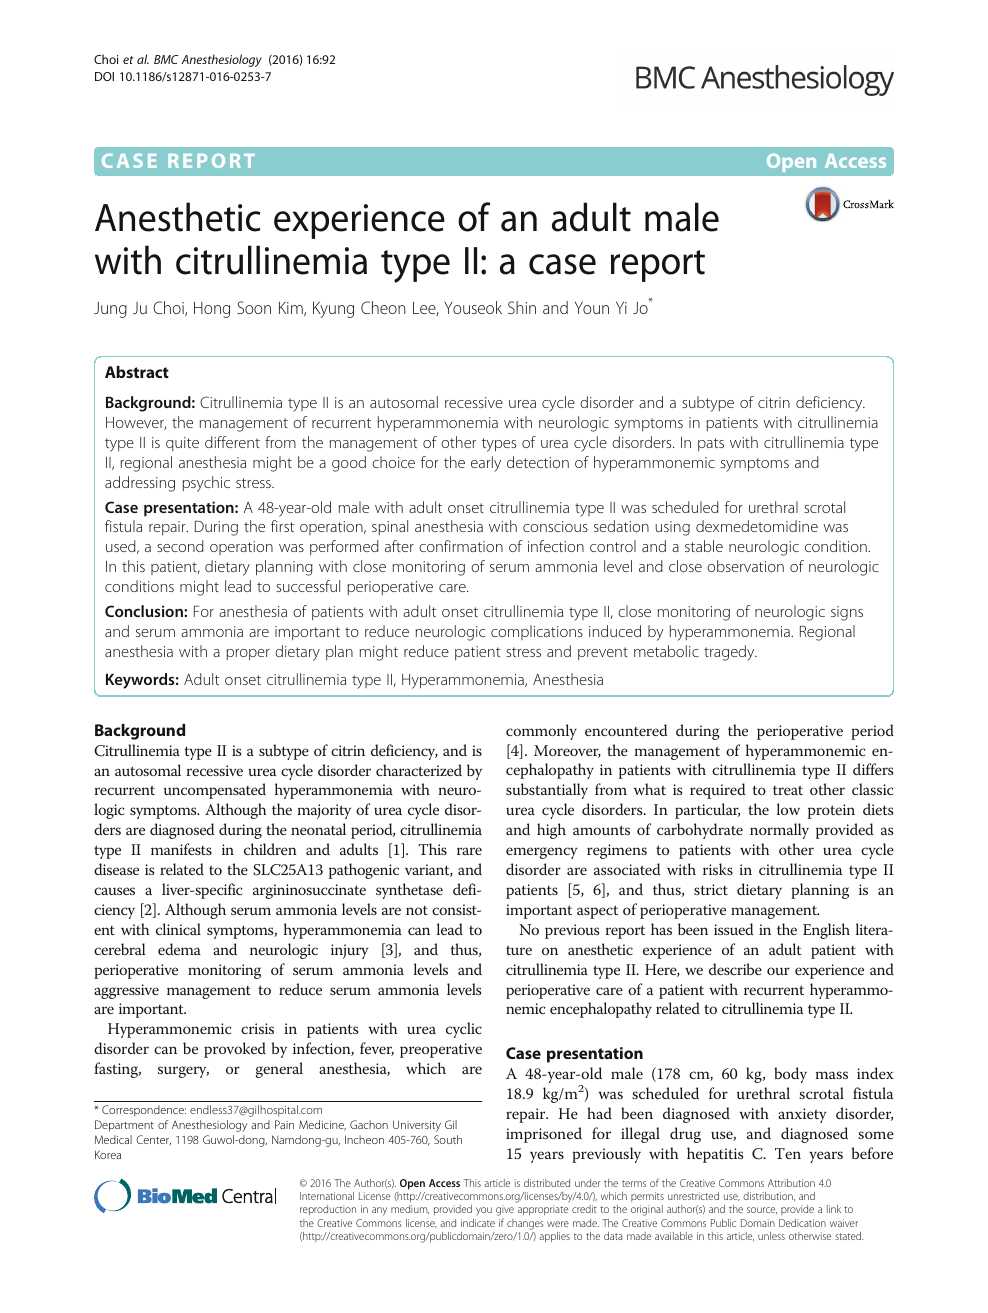 Anesthetic Experience Of An Adult Male With Citrullinemia Type Ii A Case Report Topic Of Research Paper In Clinical Medicine Download Scholarly Article Pdf And Read For Free On Cyberleninka Open